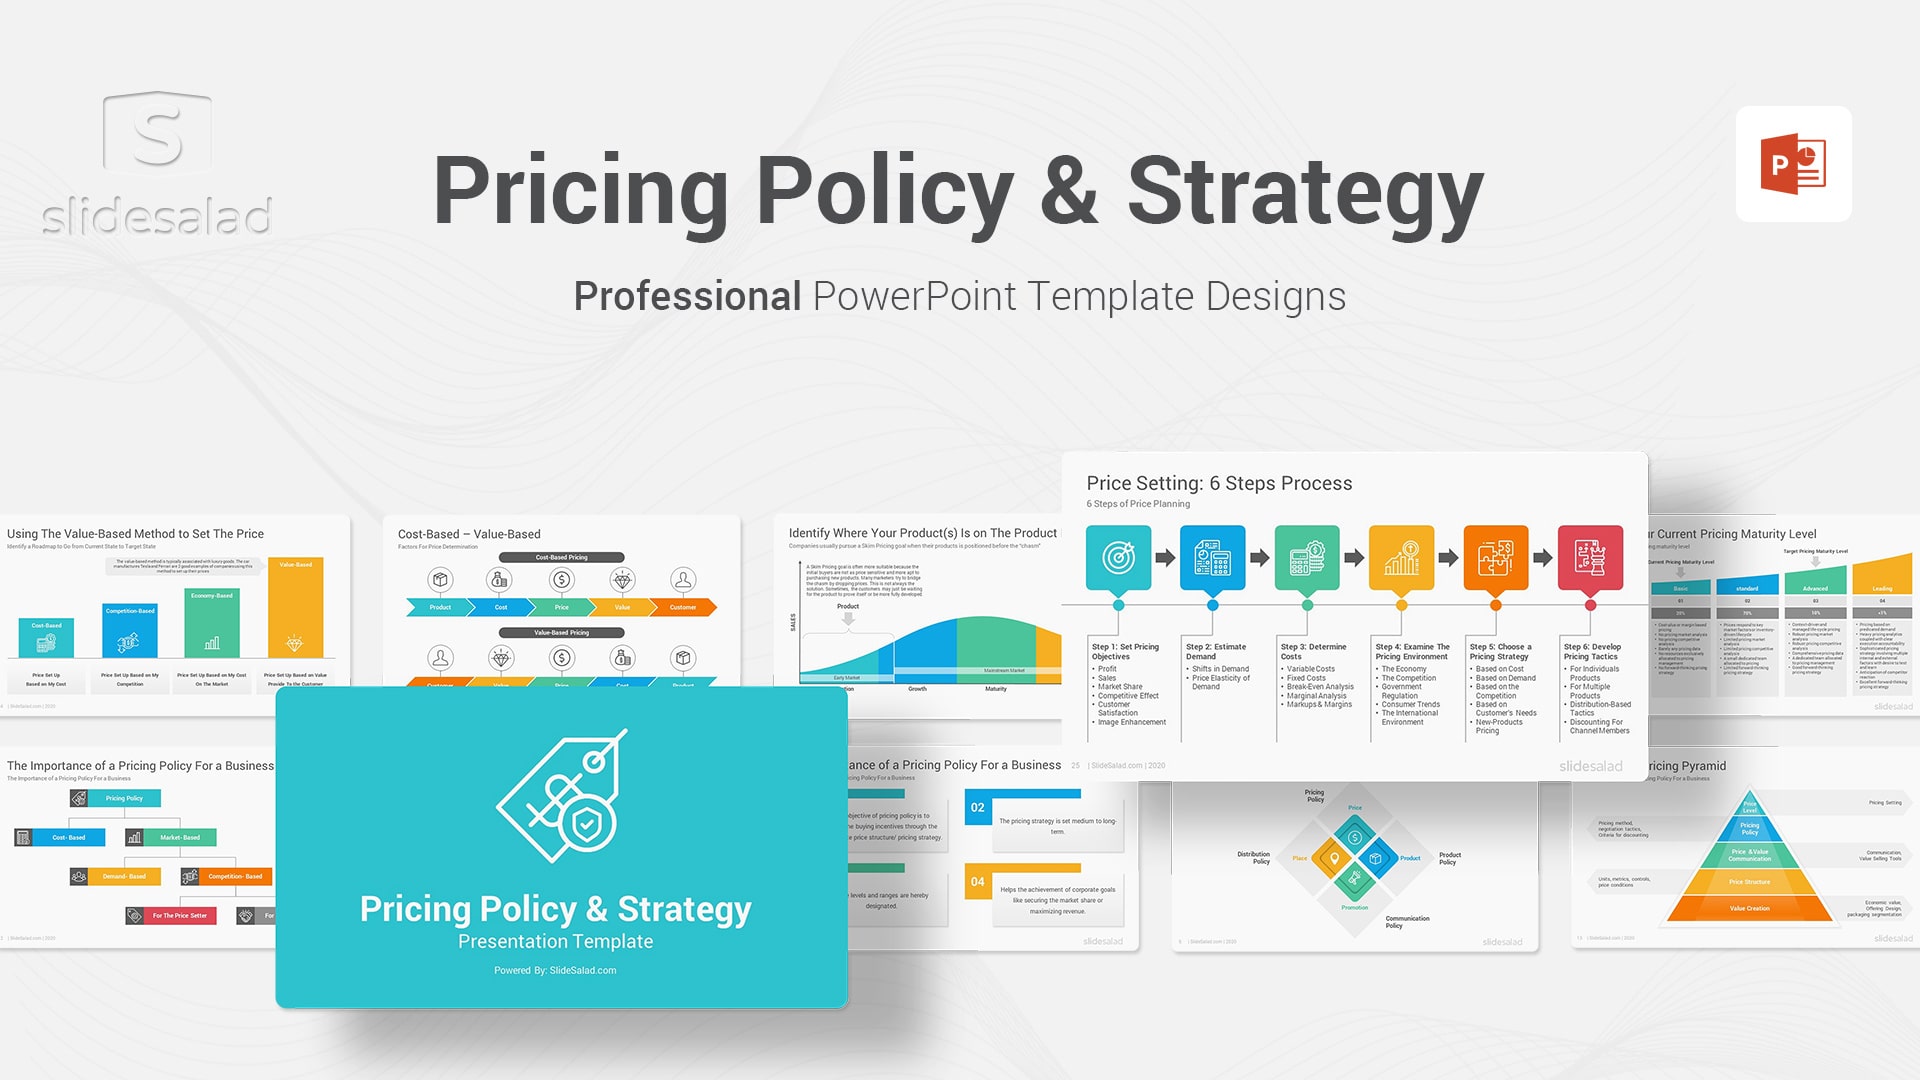 Pricing Policy and Strategy PowerPoint Template - Minimal Graphics and Vector Illustrations of Pricing Strategies in Marketing